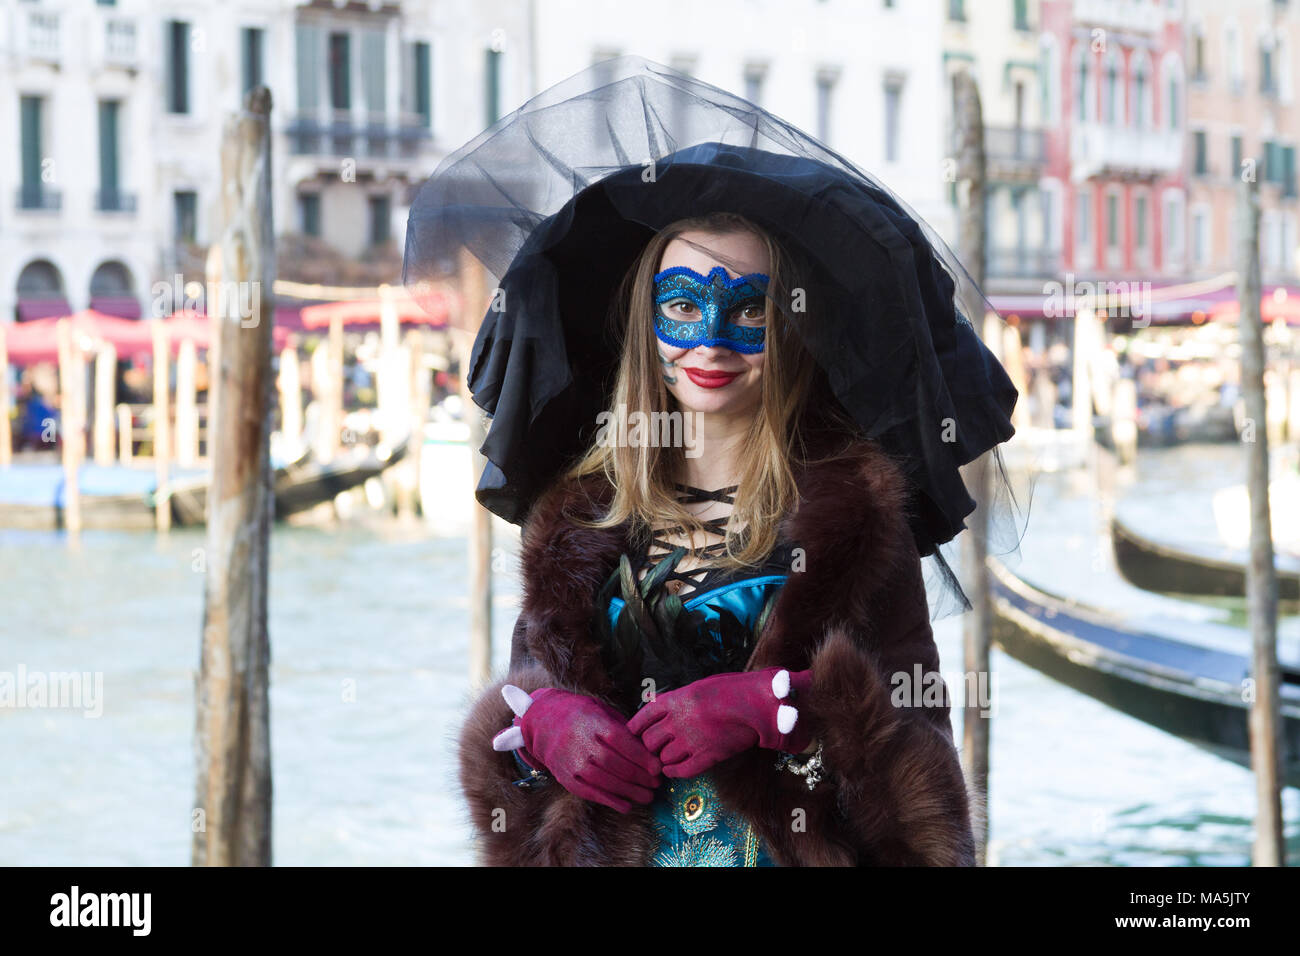 Venezia (Venice), Italy. 2 February 2018. A young woman in a costume and mask at the carnival in Venice. Stock Photo